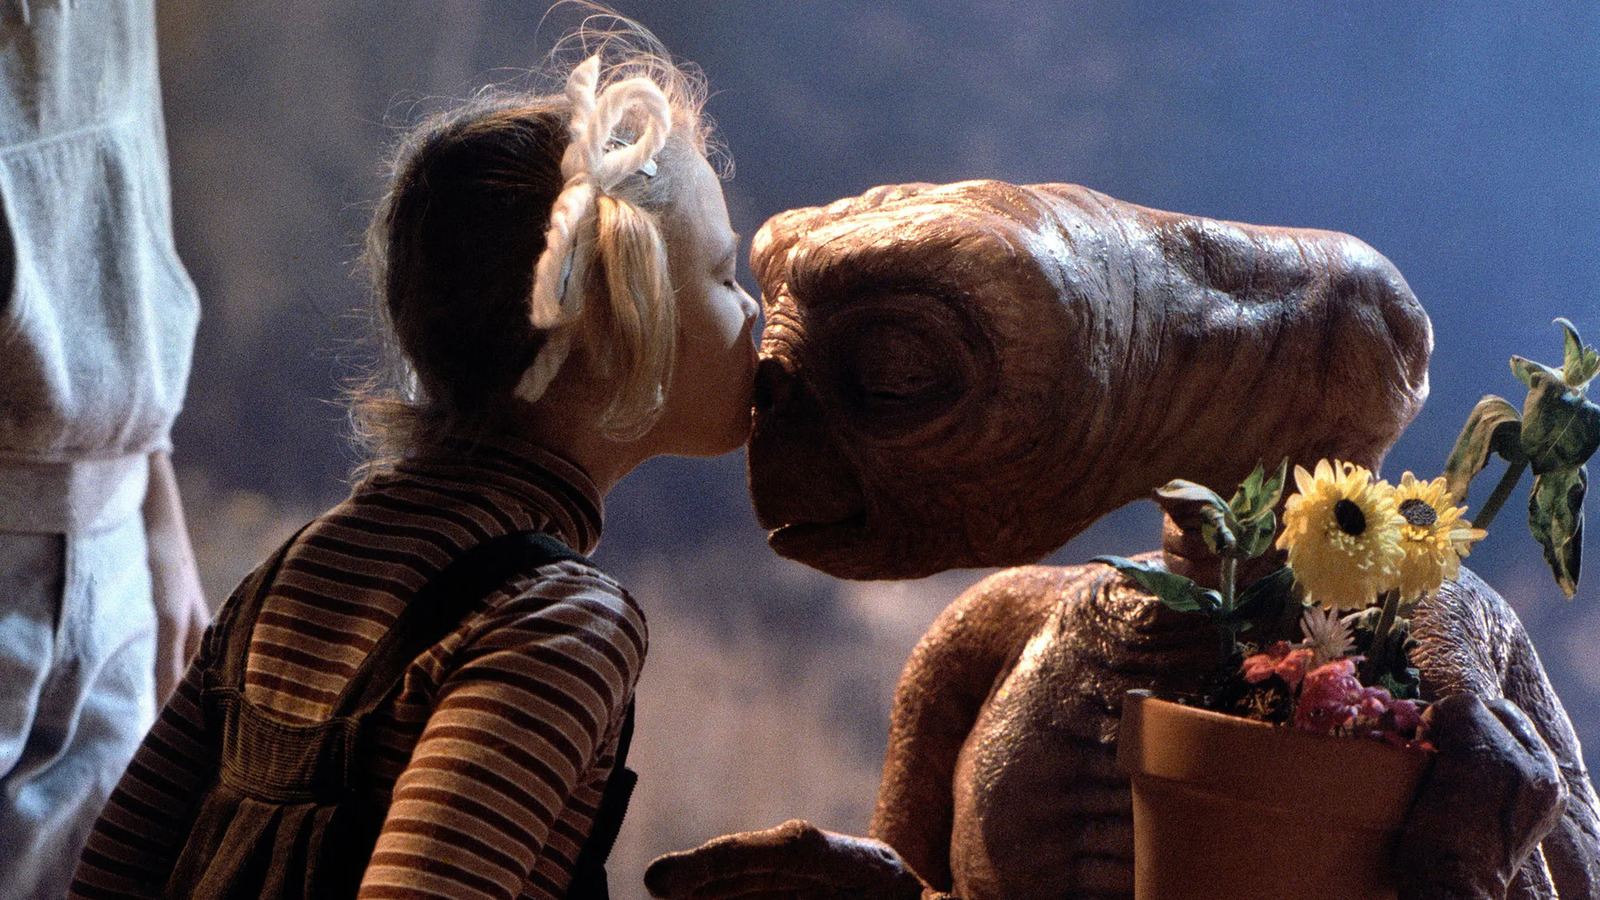 One of the most honest lines in E.T. was improvised by Drew Barrymore, 6 years old